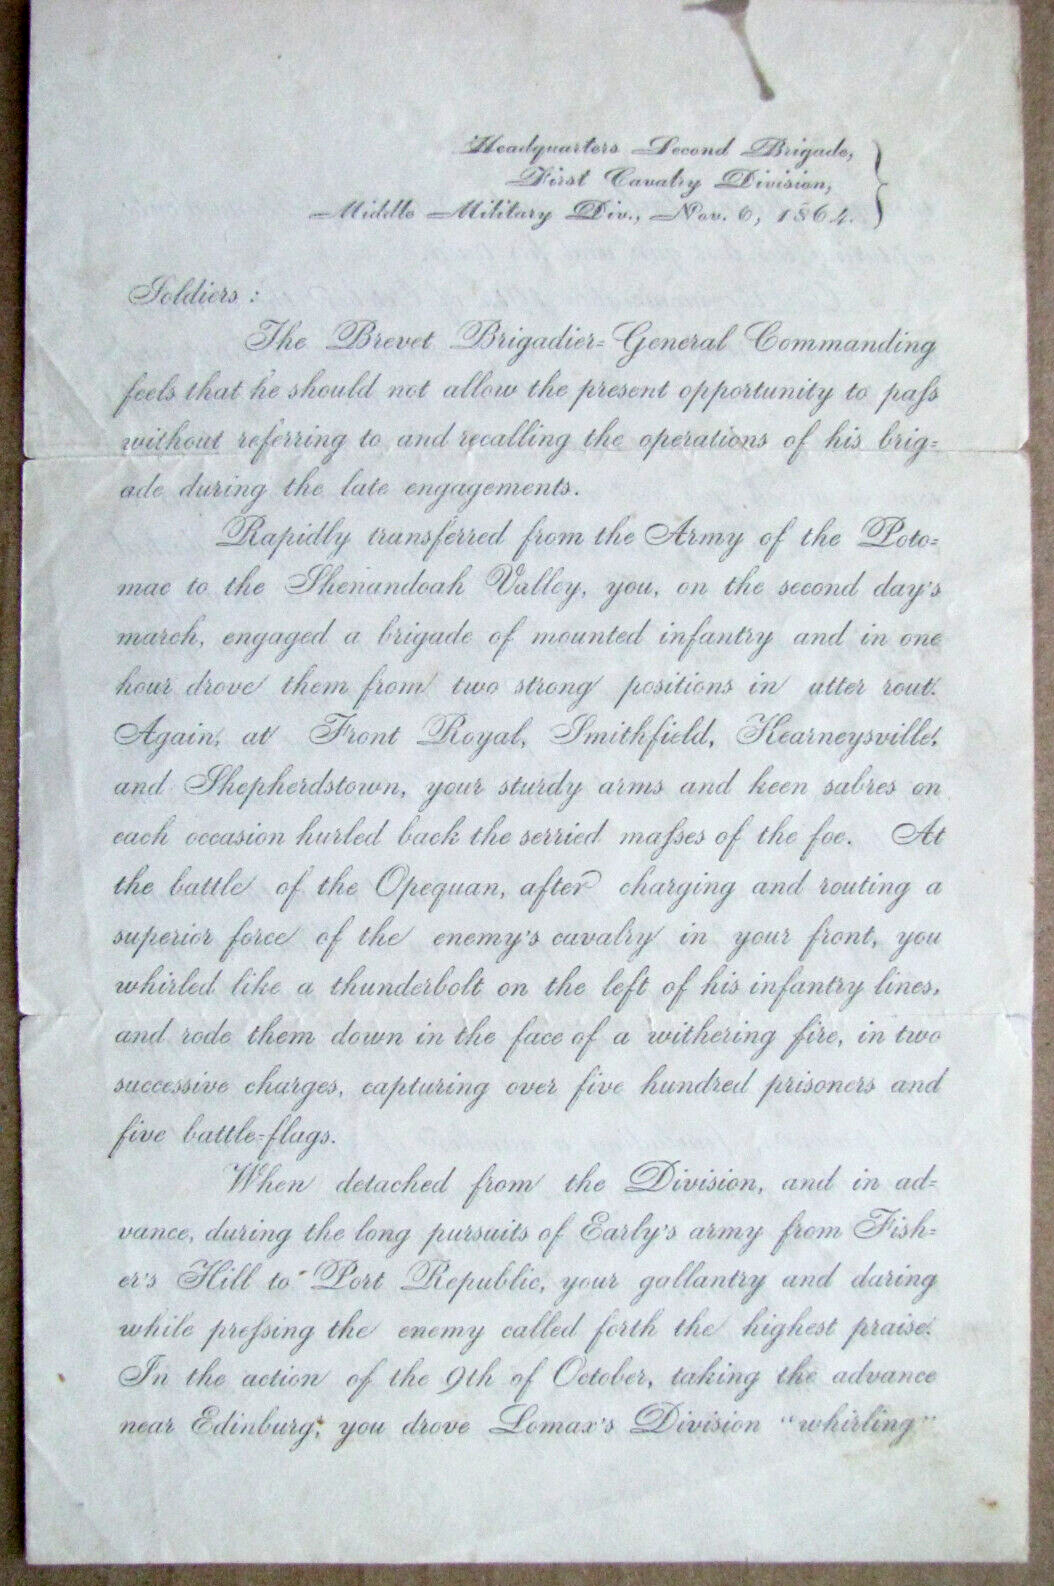 BATTLE OF WINCHESTER OPEQUON VIRGINIA GENERAL THOMAS DEVIN VICTORY ORDER 1864